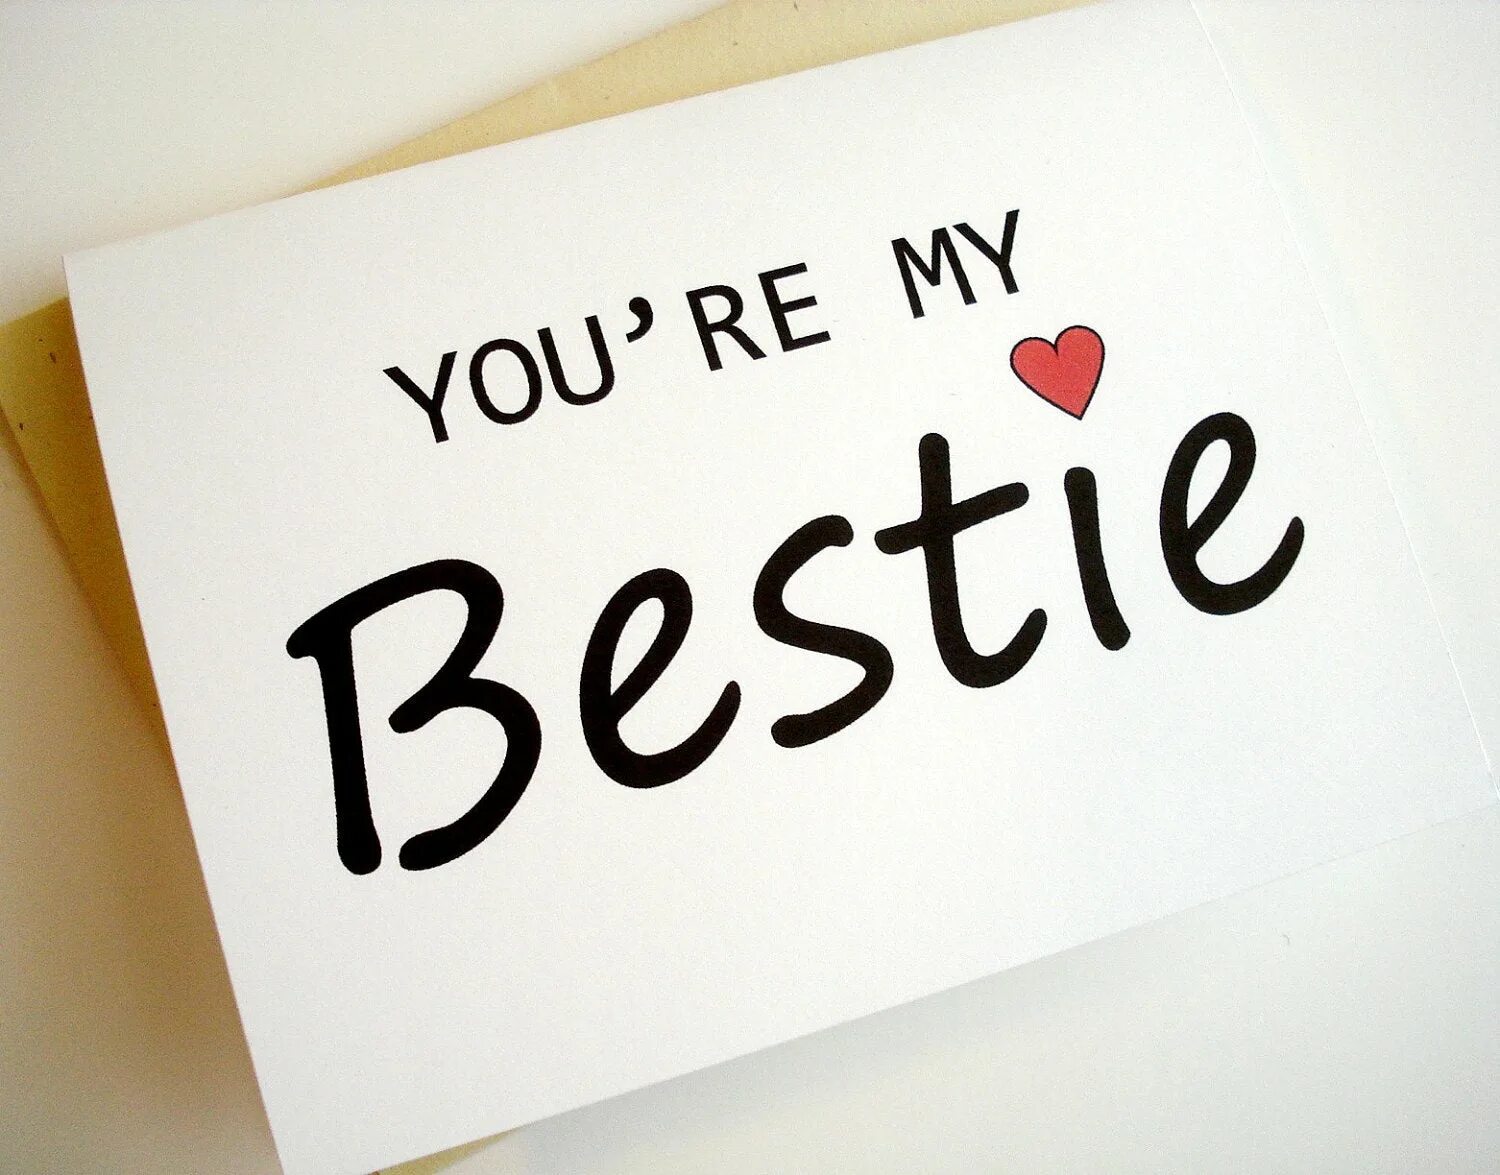 You are the best надпись. Моя bestie. You're my best friend! Картина. Открытки my best friends. She s clever